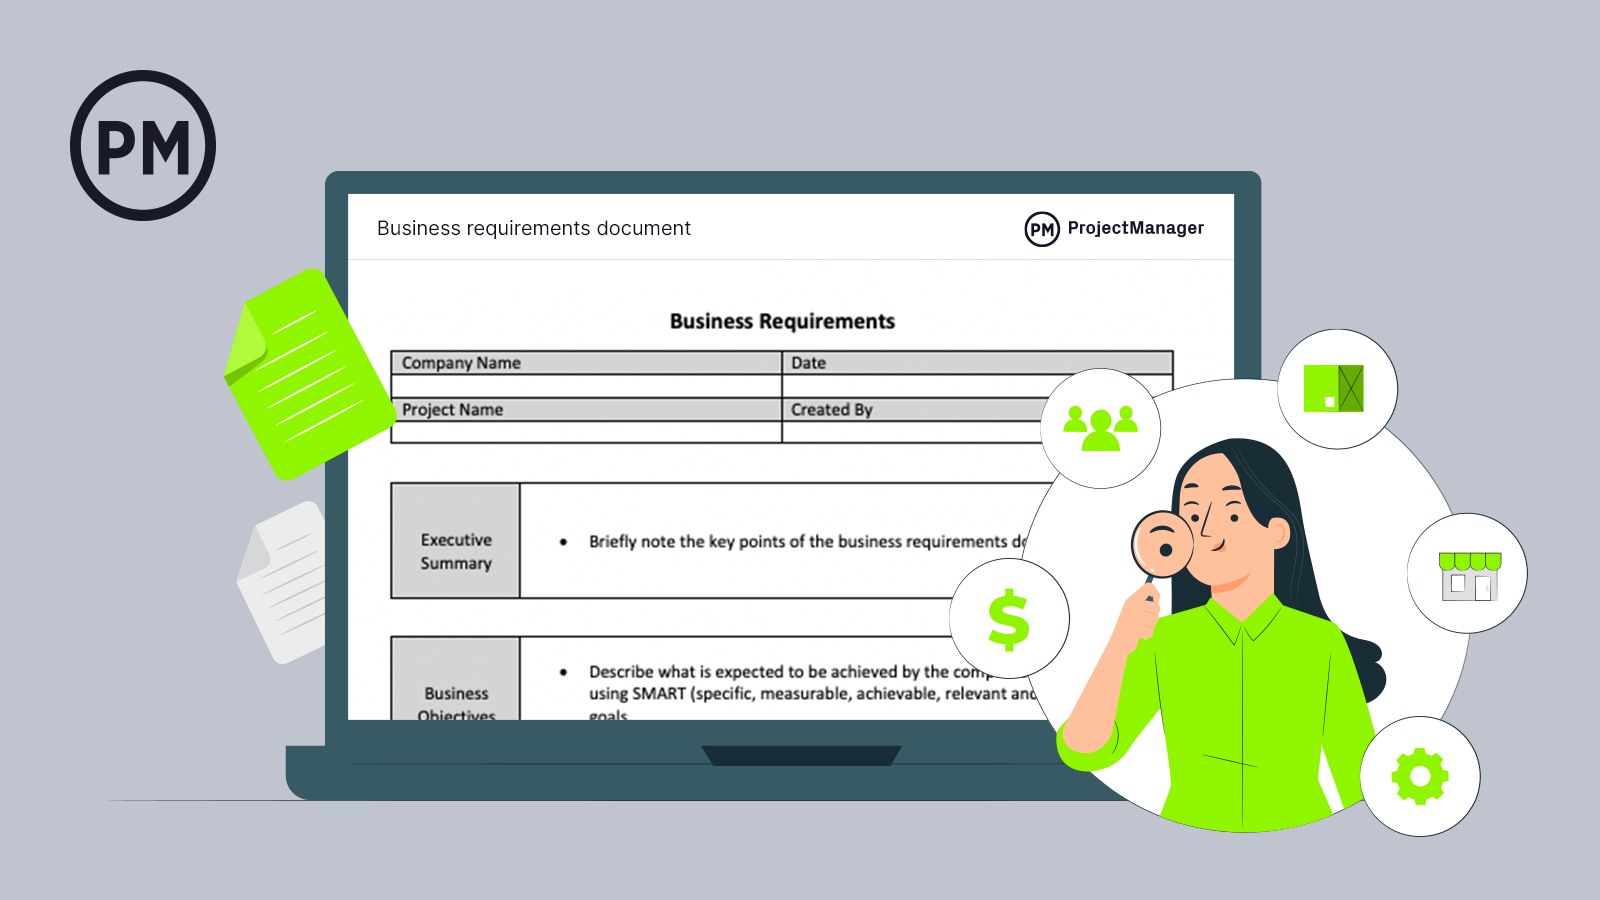 what is labor requirements in business plan